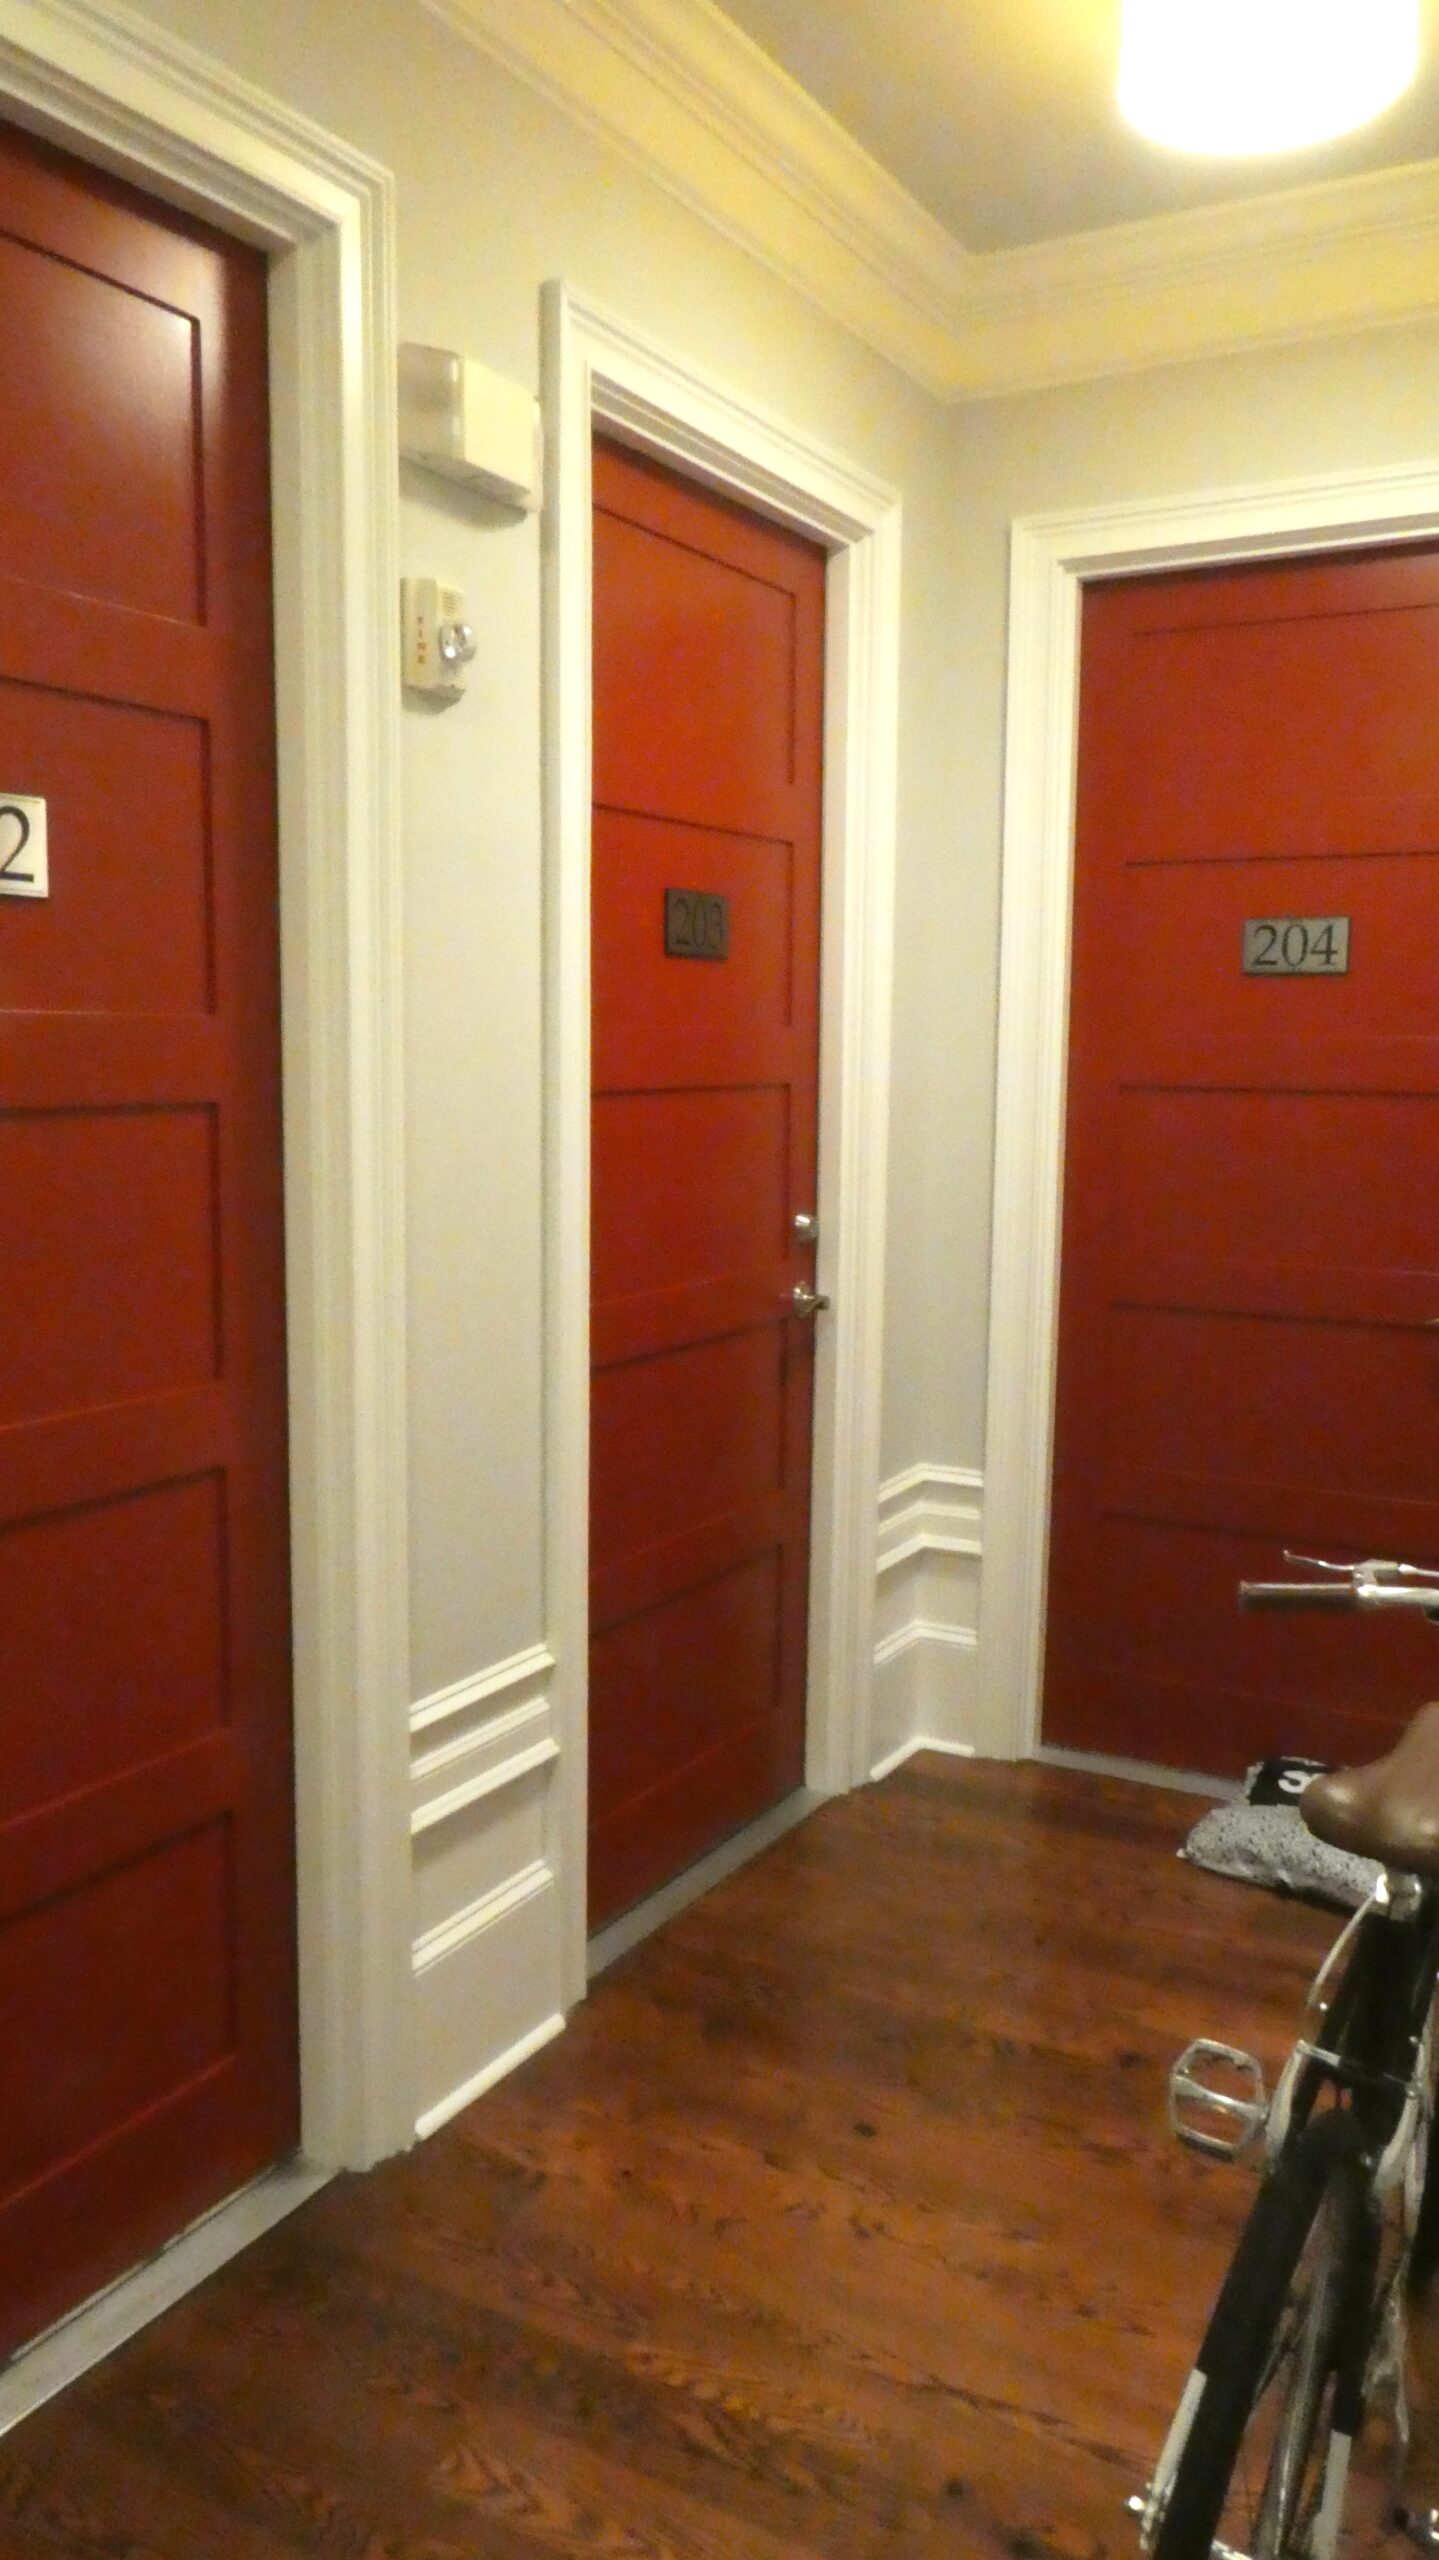 Second floor hallway showing red entry doors to individual units